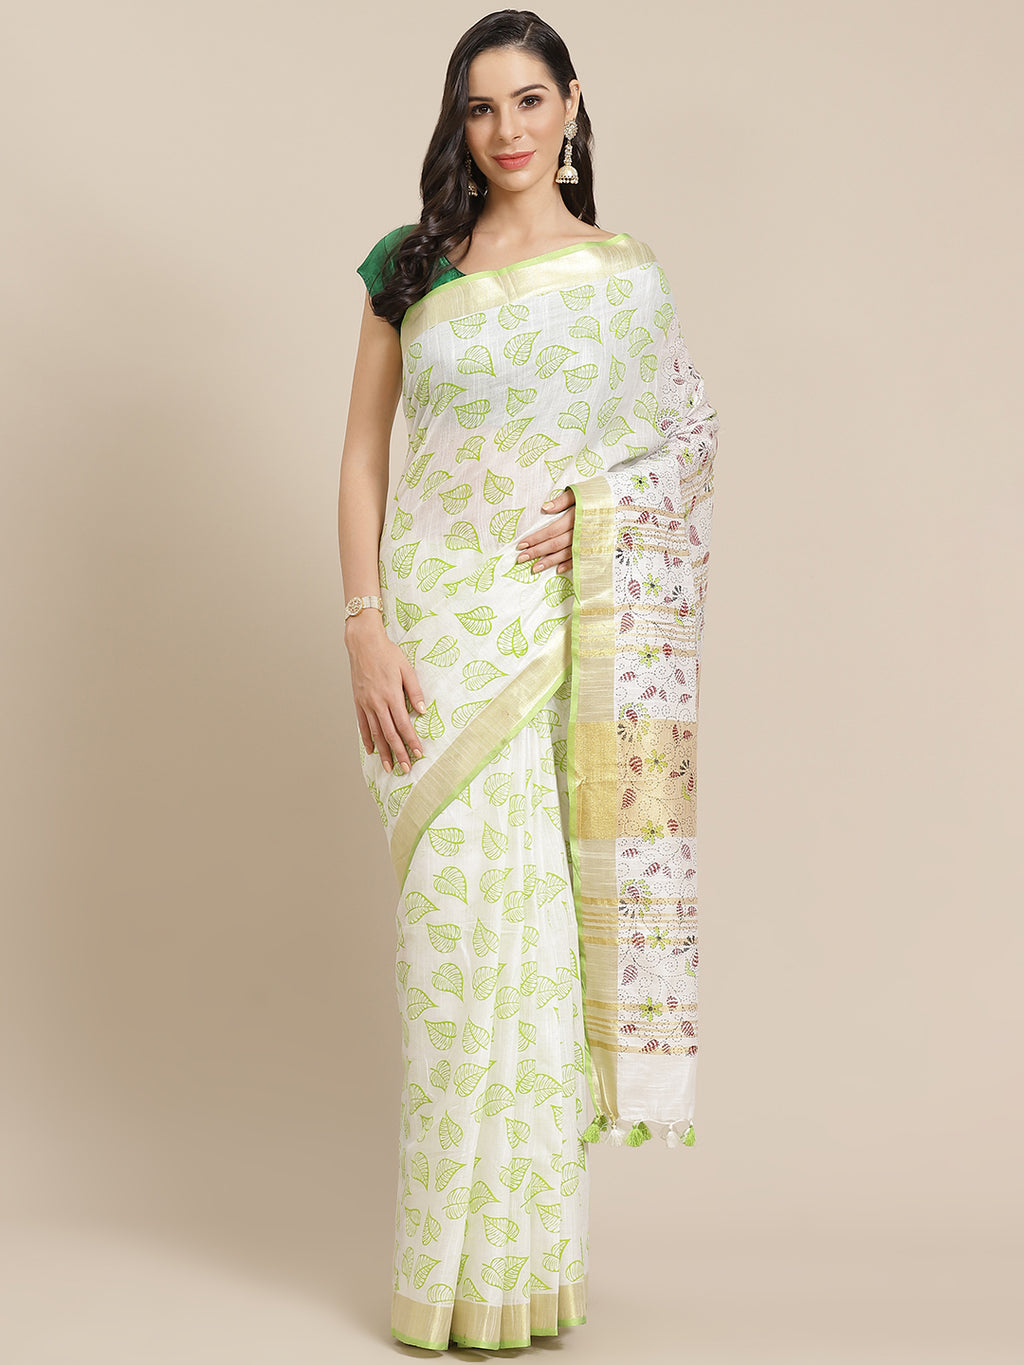 Off White and Cream, Kalakari India Bhagalpuri Linen Blend Woven Design Saree with Blouse ALBGSA0133-Saree-Kalakari India-ALBGSA0133-Cotton, Geographical Indication, Hand Crafted, Heritage Prints, Linen, Natural Dyes, Red, Sarees, Shibori, Sustainable Fabrics, Woven, Yellow-[Linen,Ethnic,wear,Fashionista,Handloom,Handicraft,Indigo,blockprint,block,print,Cotton,Chanderi,Blue, latest,classy,party,bollywood,trendy,summer,style,traditional,formal,elegant,unique,style,hand,block,print, dabu,booti,gif